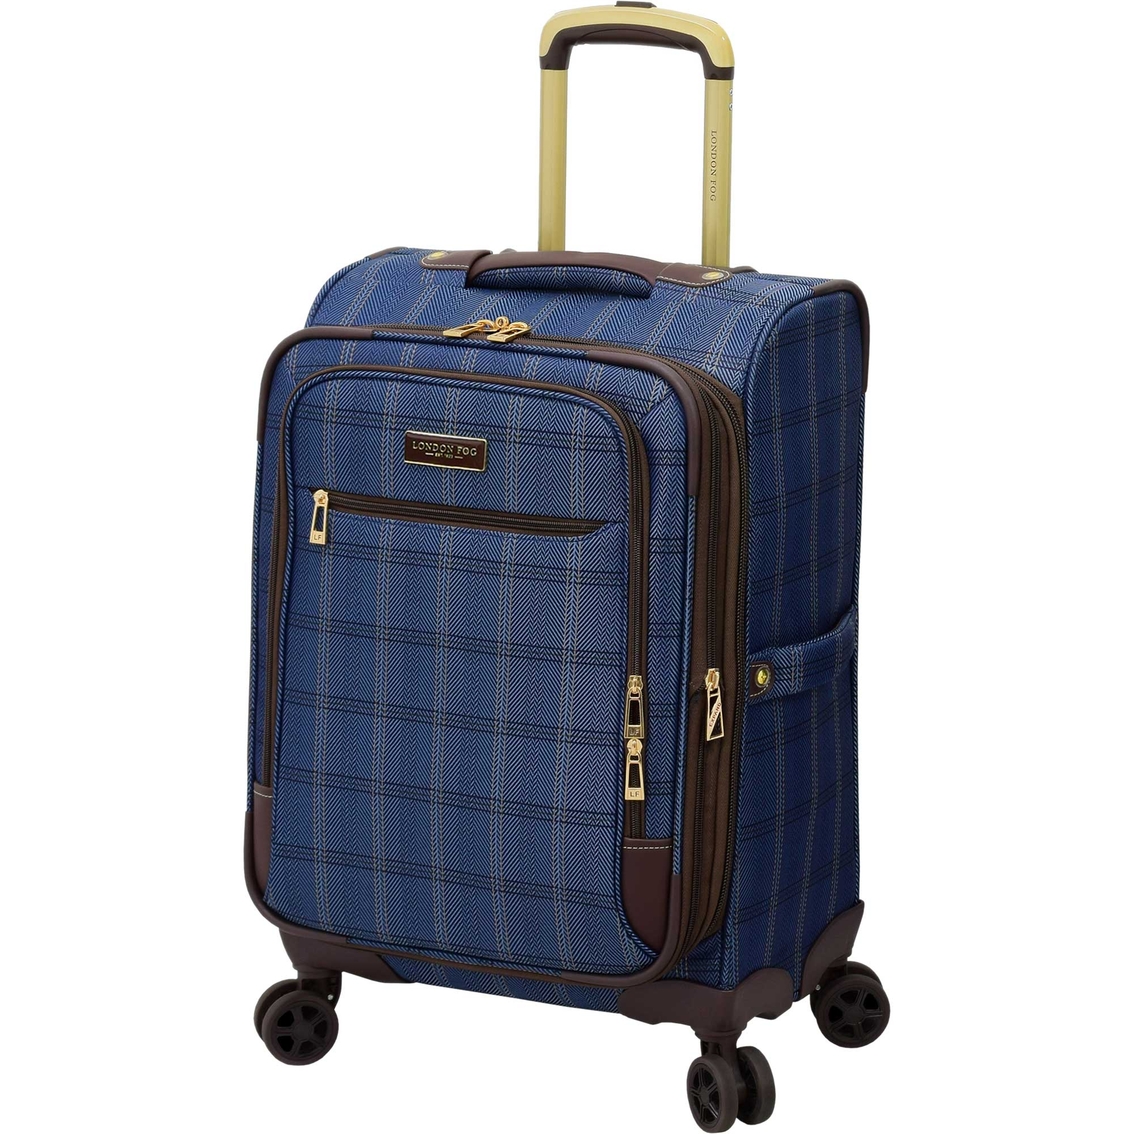 London Fog Brentwood II 20 in. Expandable Spinner Carry On - Image 1 of 6